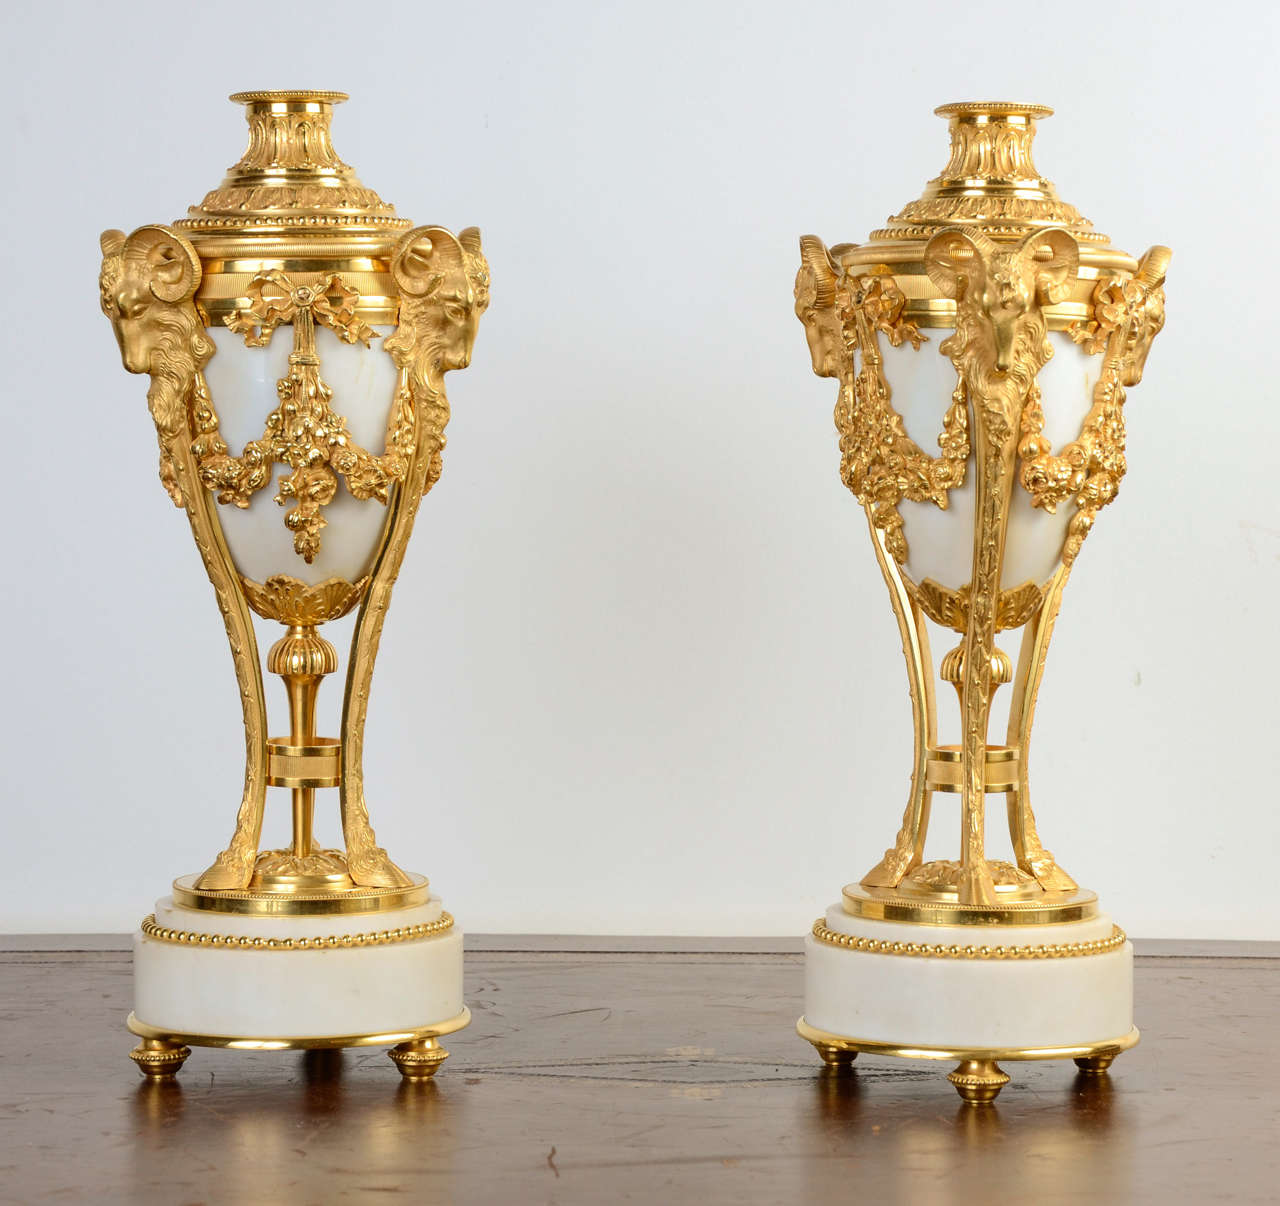 Cassolettes double, with a reversible top tu be use as a candelstick.
Decorated with bronze gilded with real gold, finely chizelled